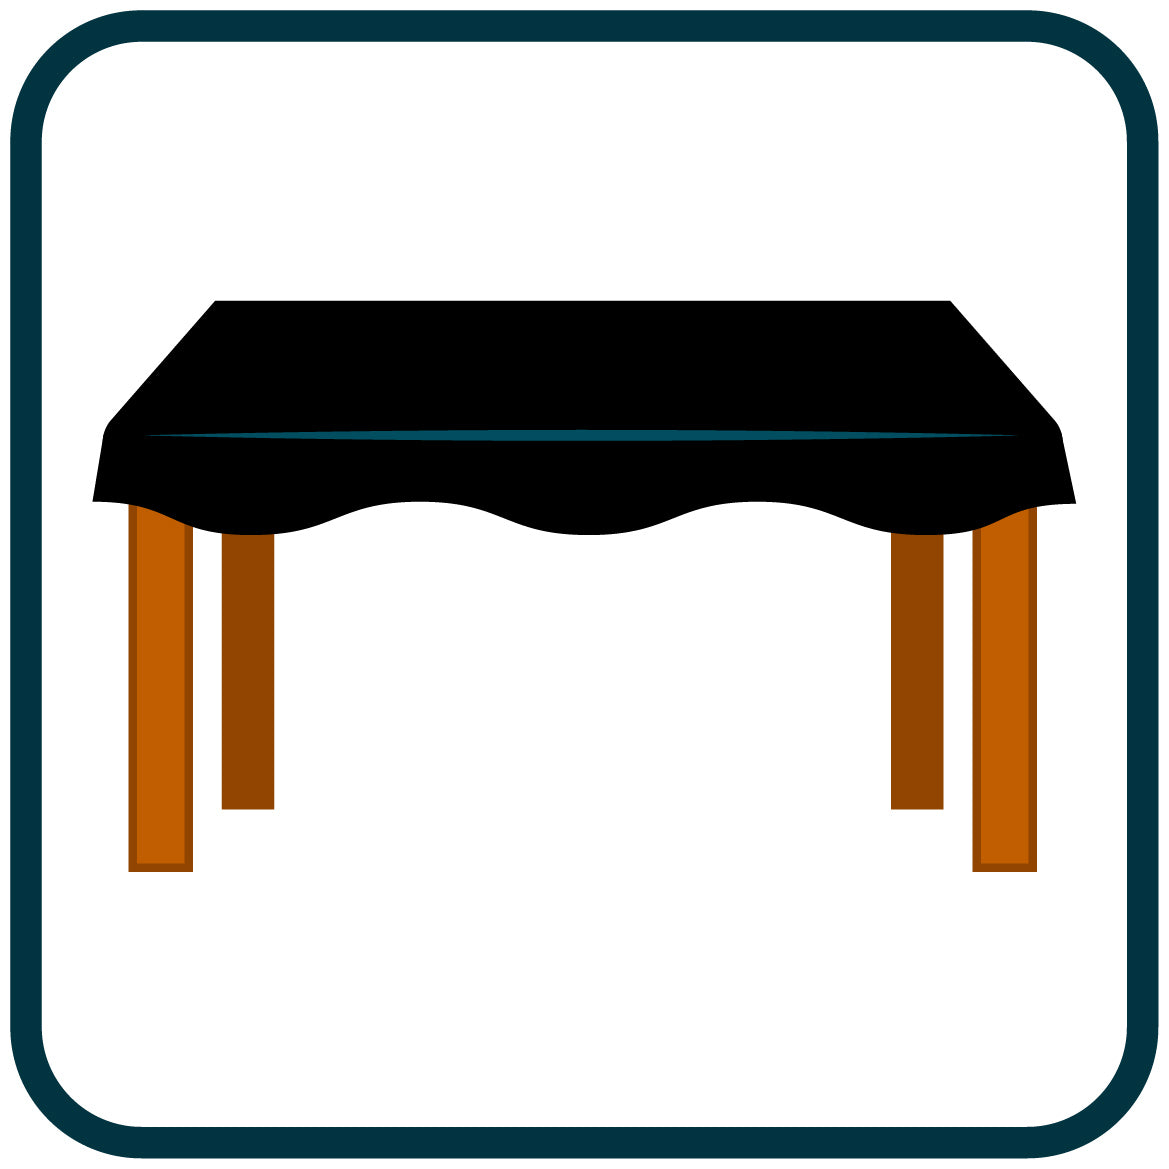 Tablecloth Add-On (for SCC Staff ONLY)